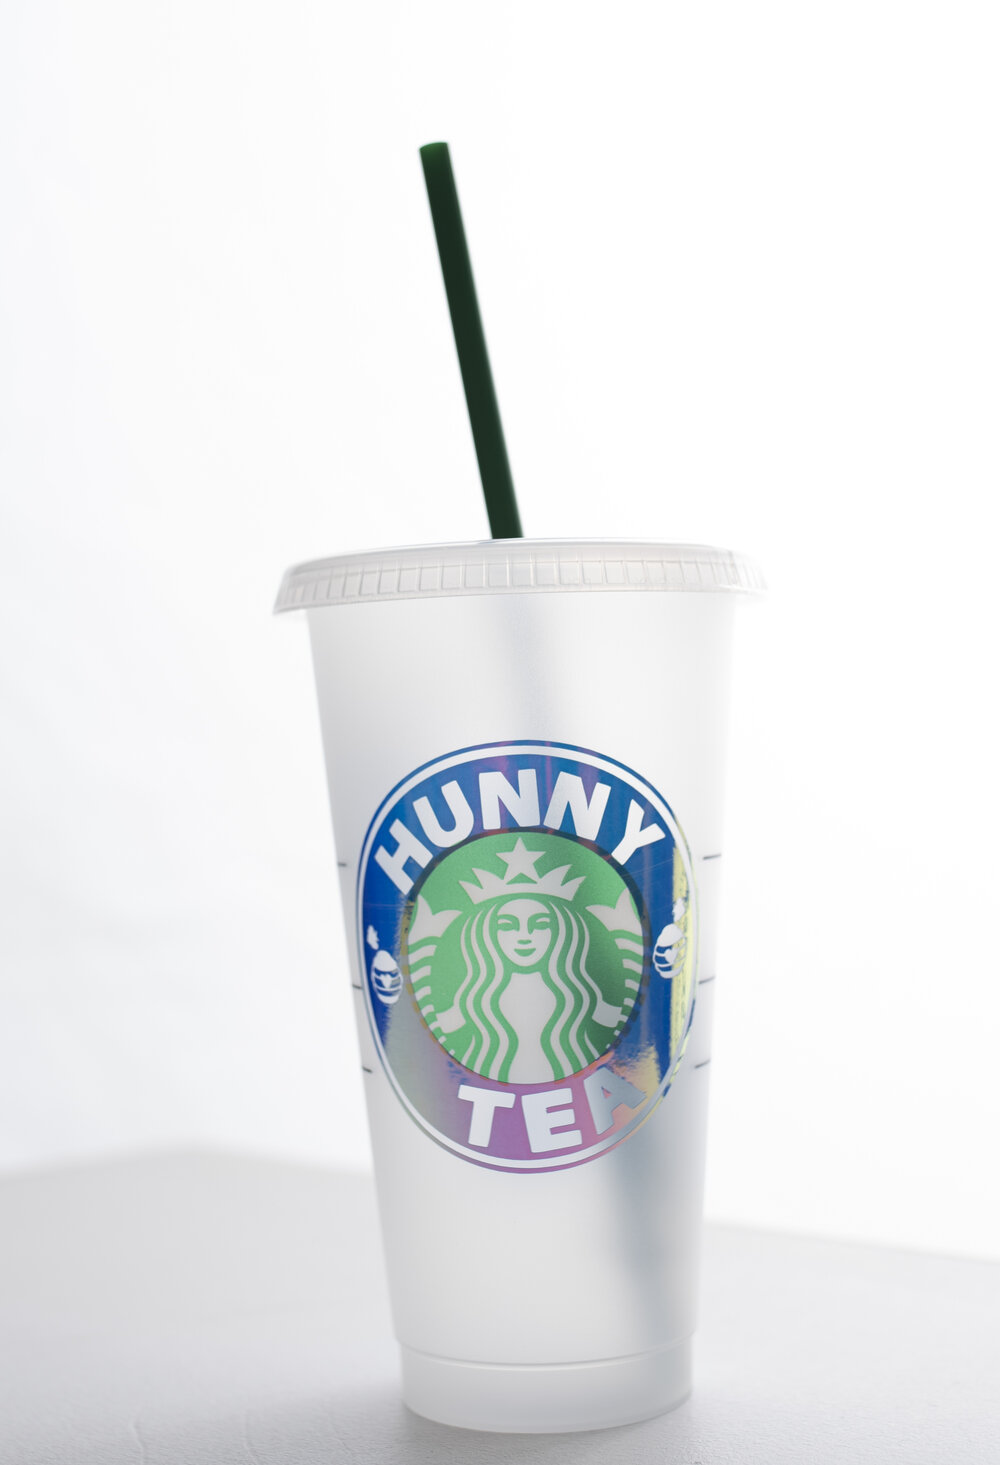 Starbucks Kitchen | Starbucks Cold to Go Cup Accessory Lid | Color: Black | Size: Os | Soccerstarr455's Closet